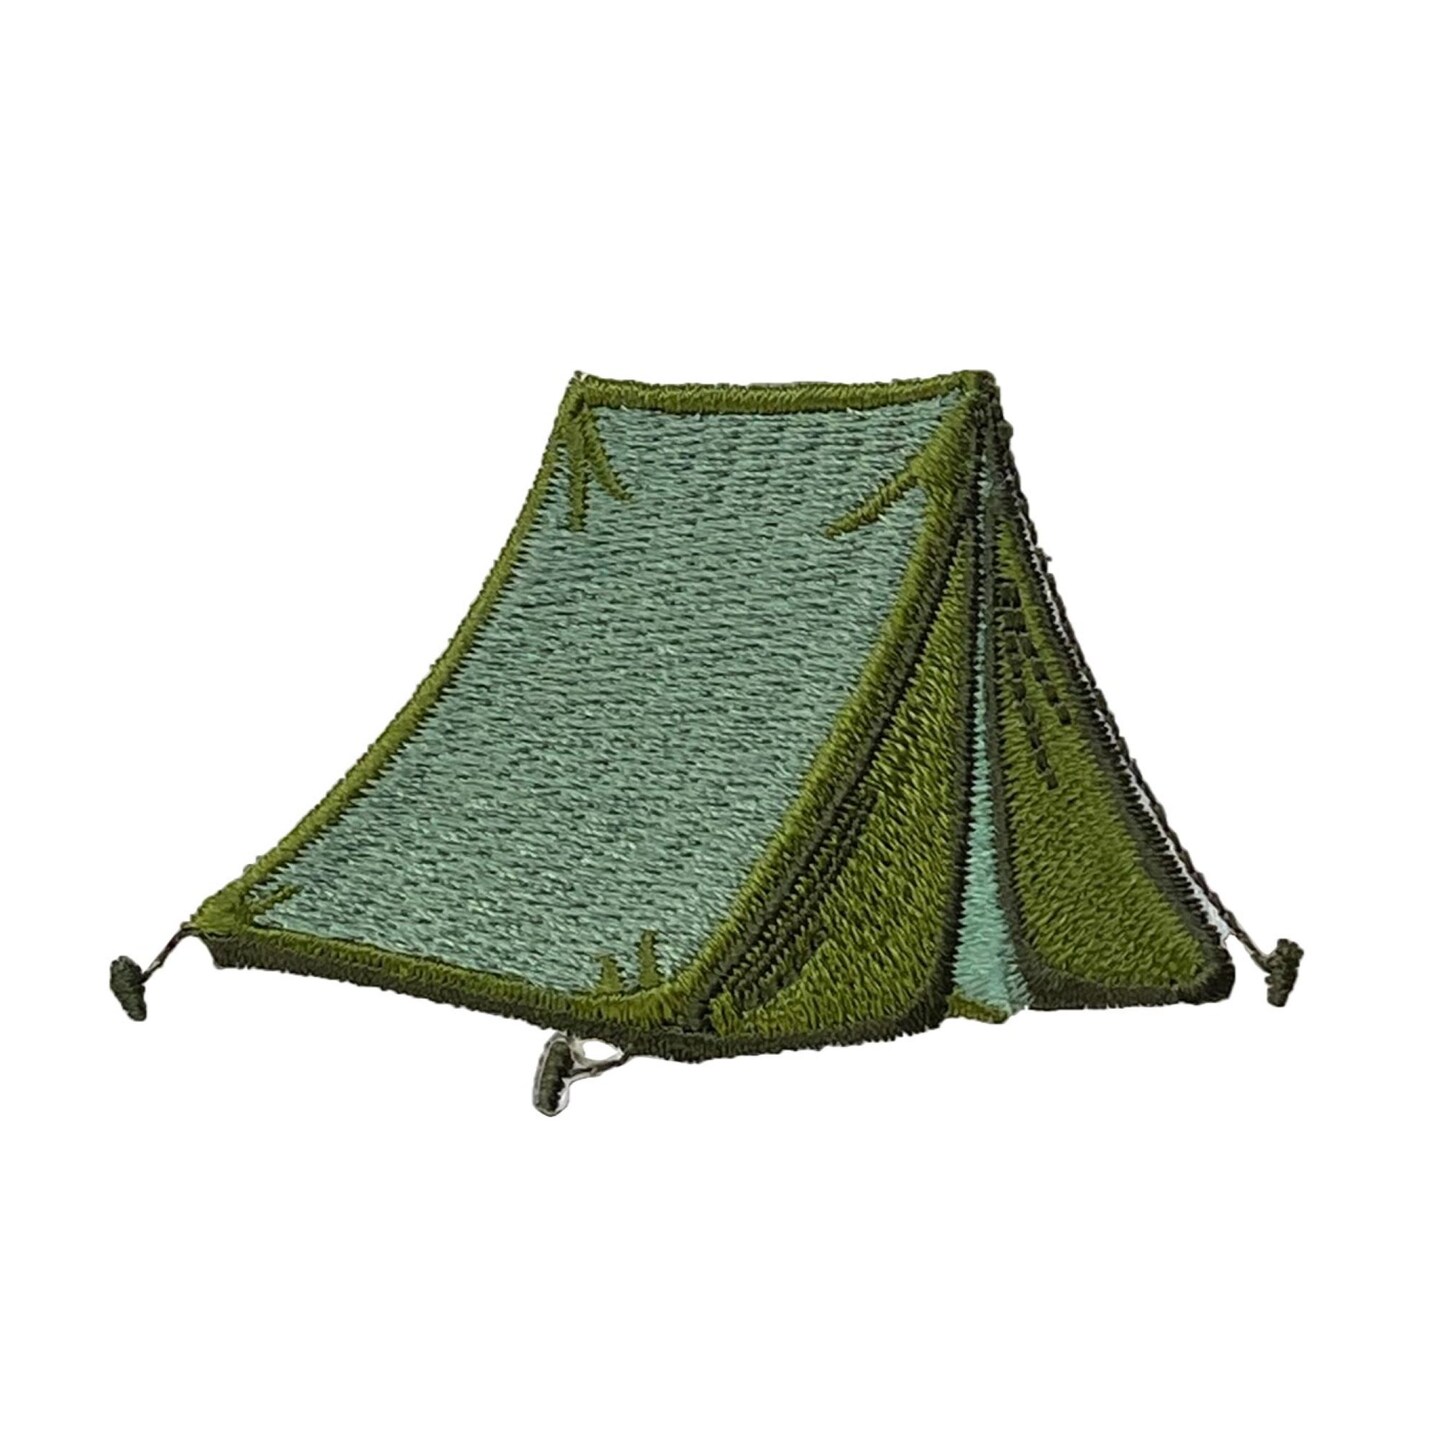 Camping Tent, Army Green, Embroidered Iron on Patch